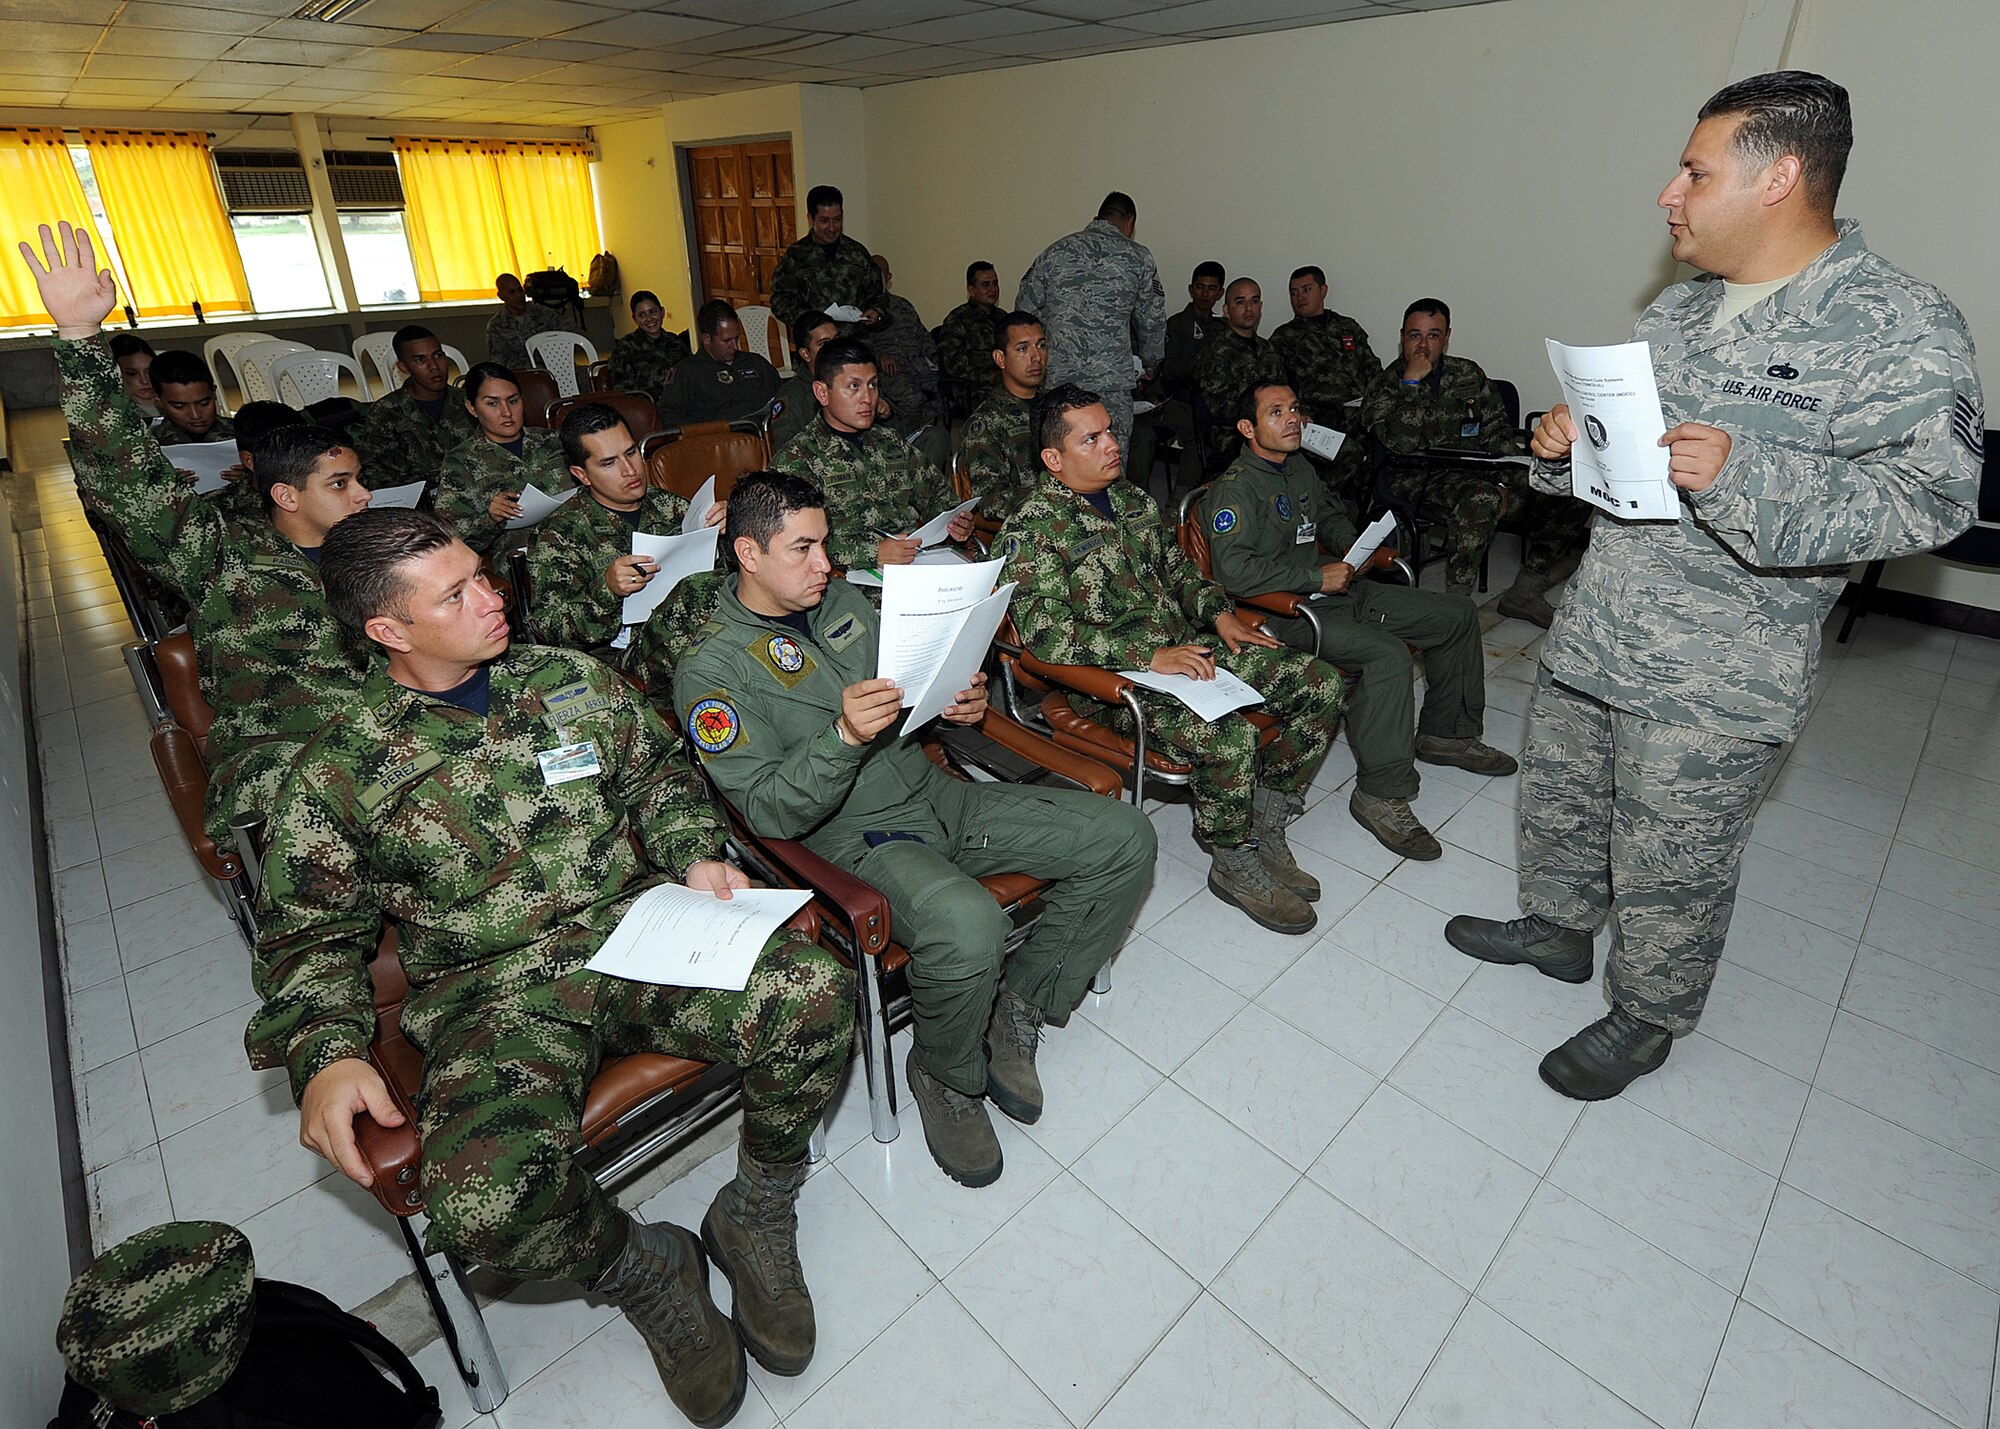 Technical Sgt. Melvin Rosario, Inter-American Air Forces Academy instructor, goes over the maintenance operations center hand out during the first day of MOC seminars June 12, at Comando Aéreo de Combate No. 1 base, Palanquero, Colombia, as part of a month-long Air Mobility Command Building Partner Capacity mission. (U.S. Air Force photo by Tech. Sgt. Lesley Waters)